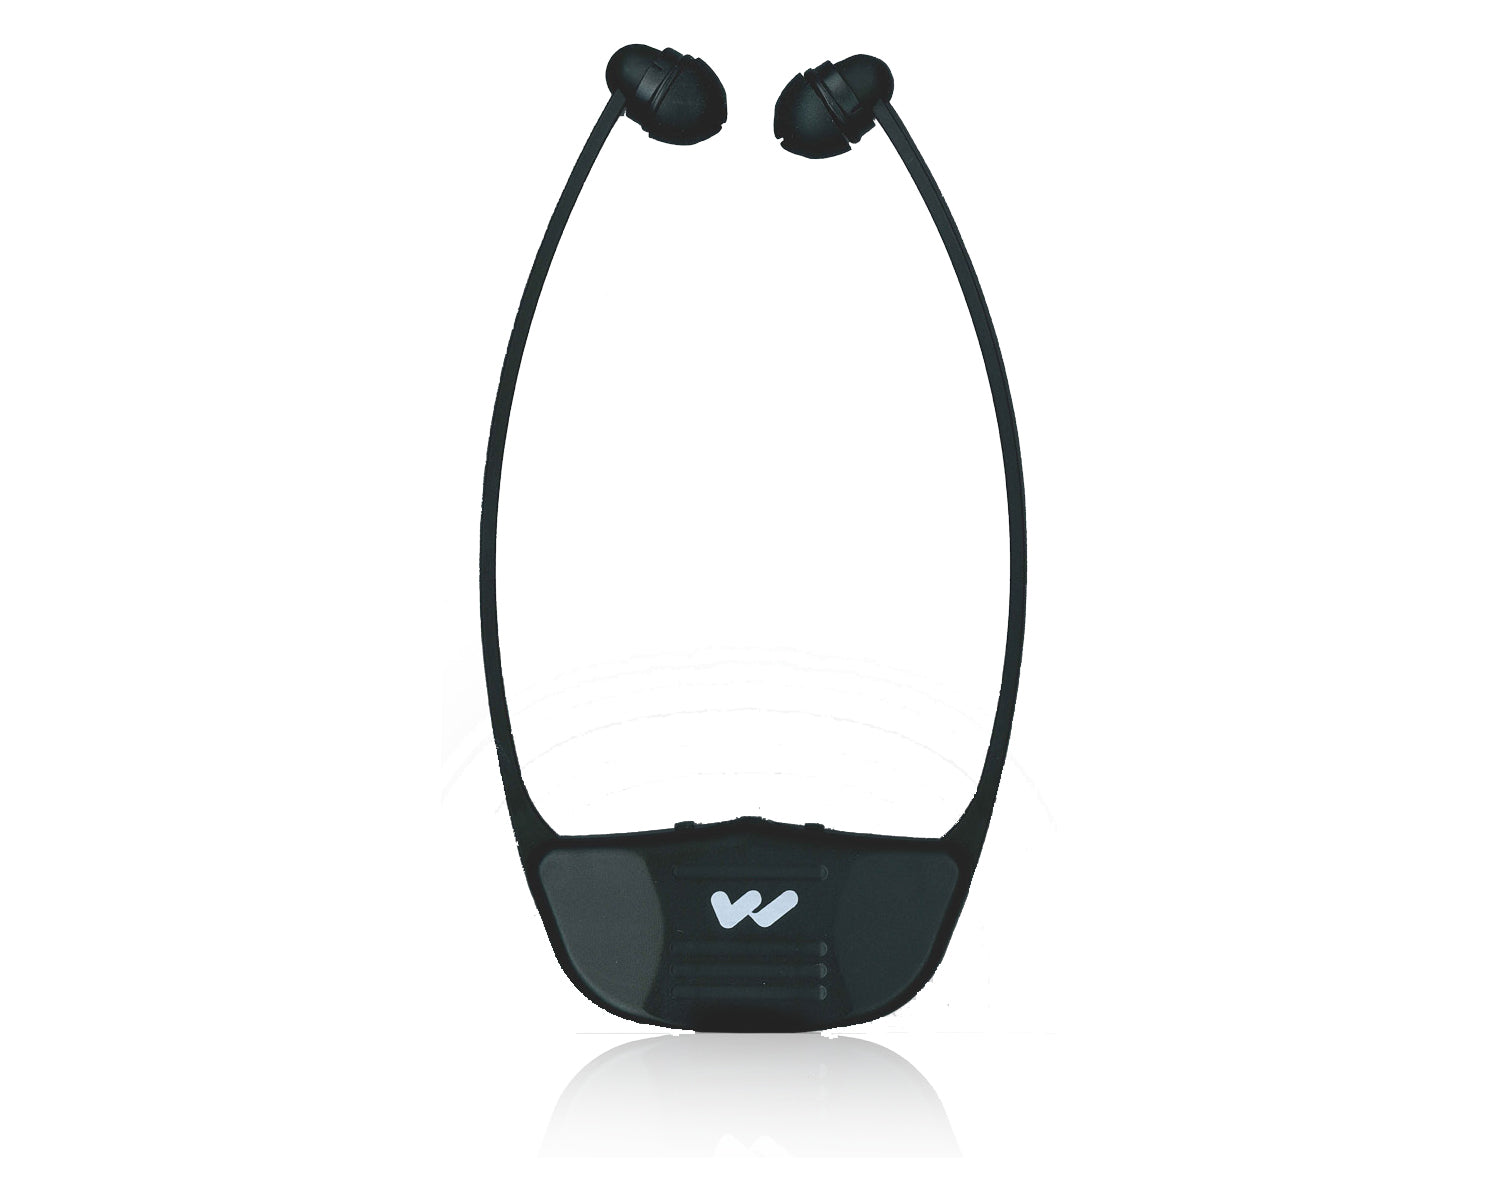 Williams AV WIR SYS 90 ADV SoundPlus 2-Ch IR Assistive Listening System for Large Areas